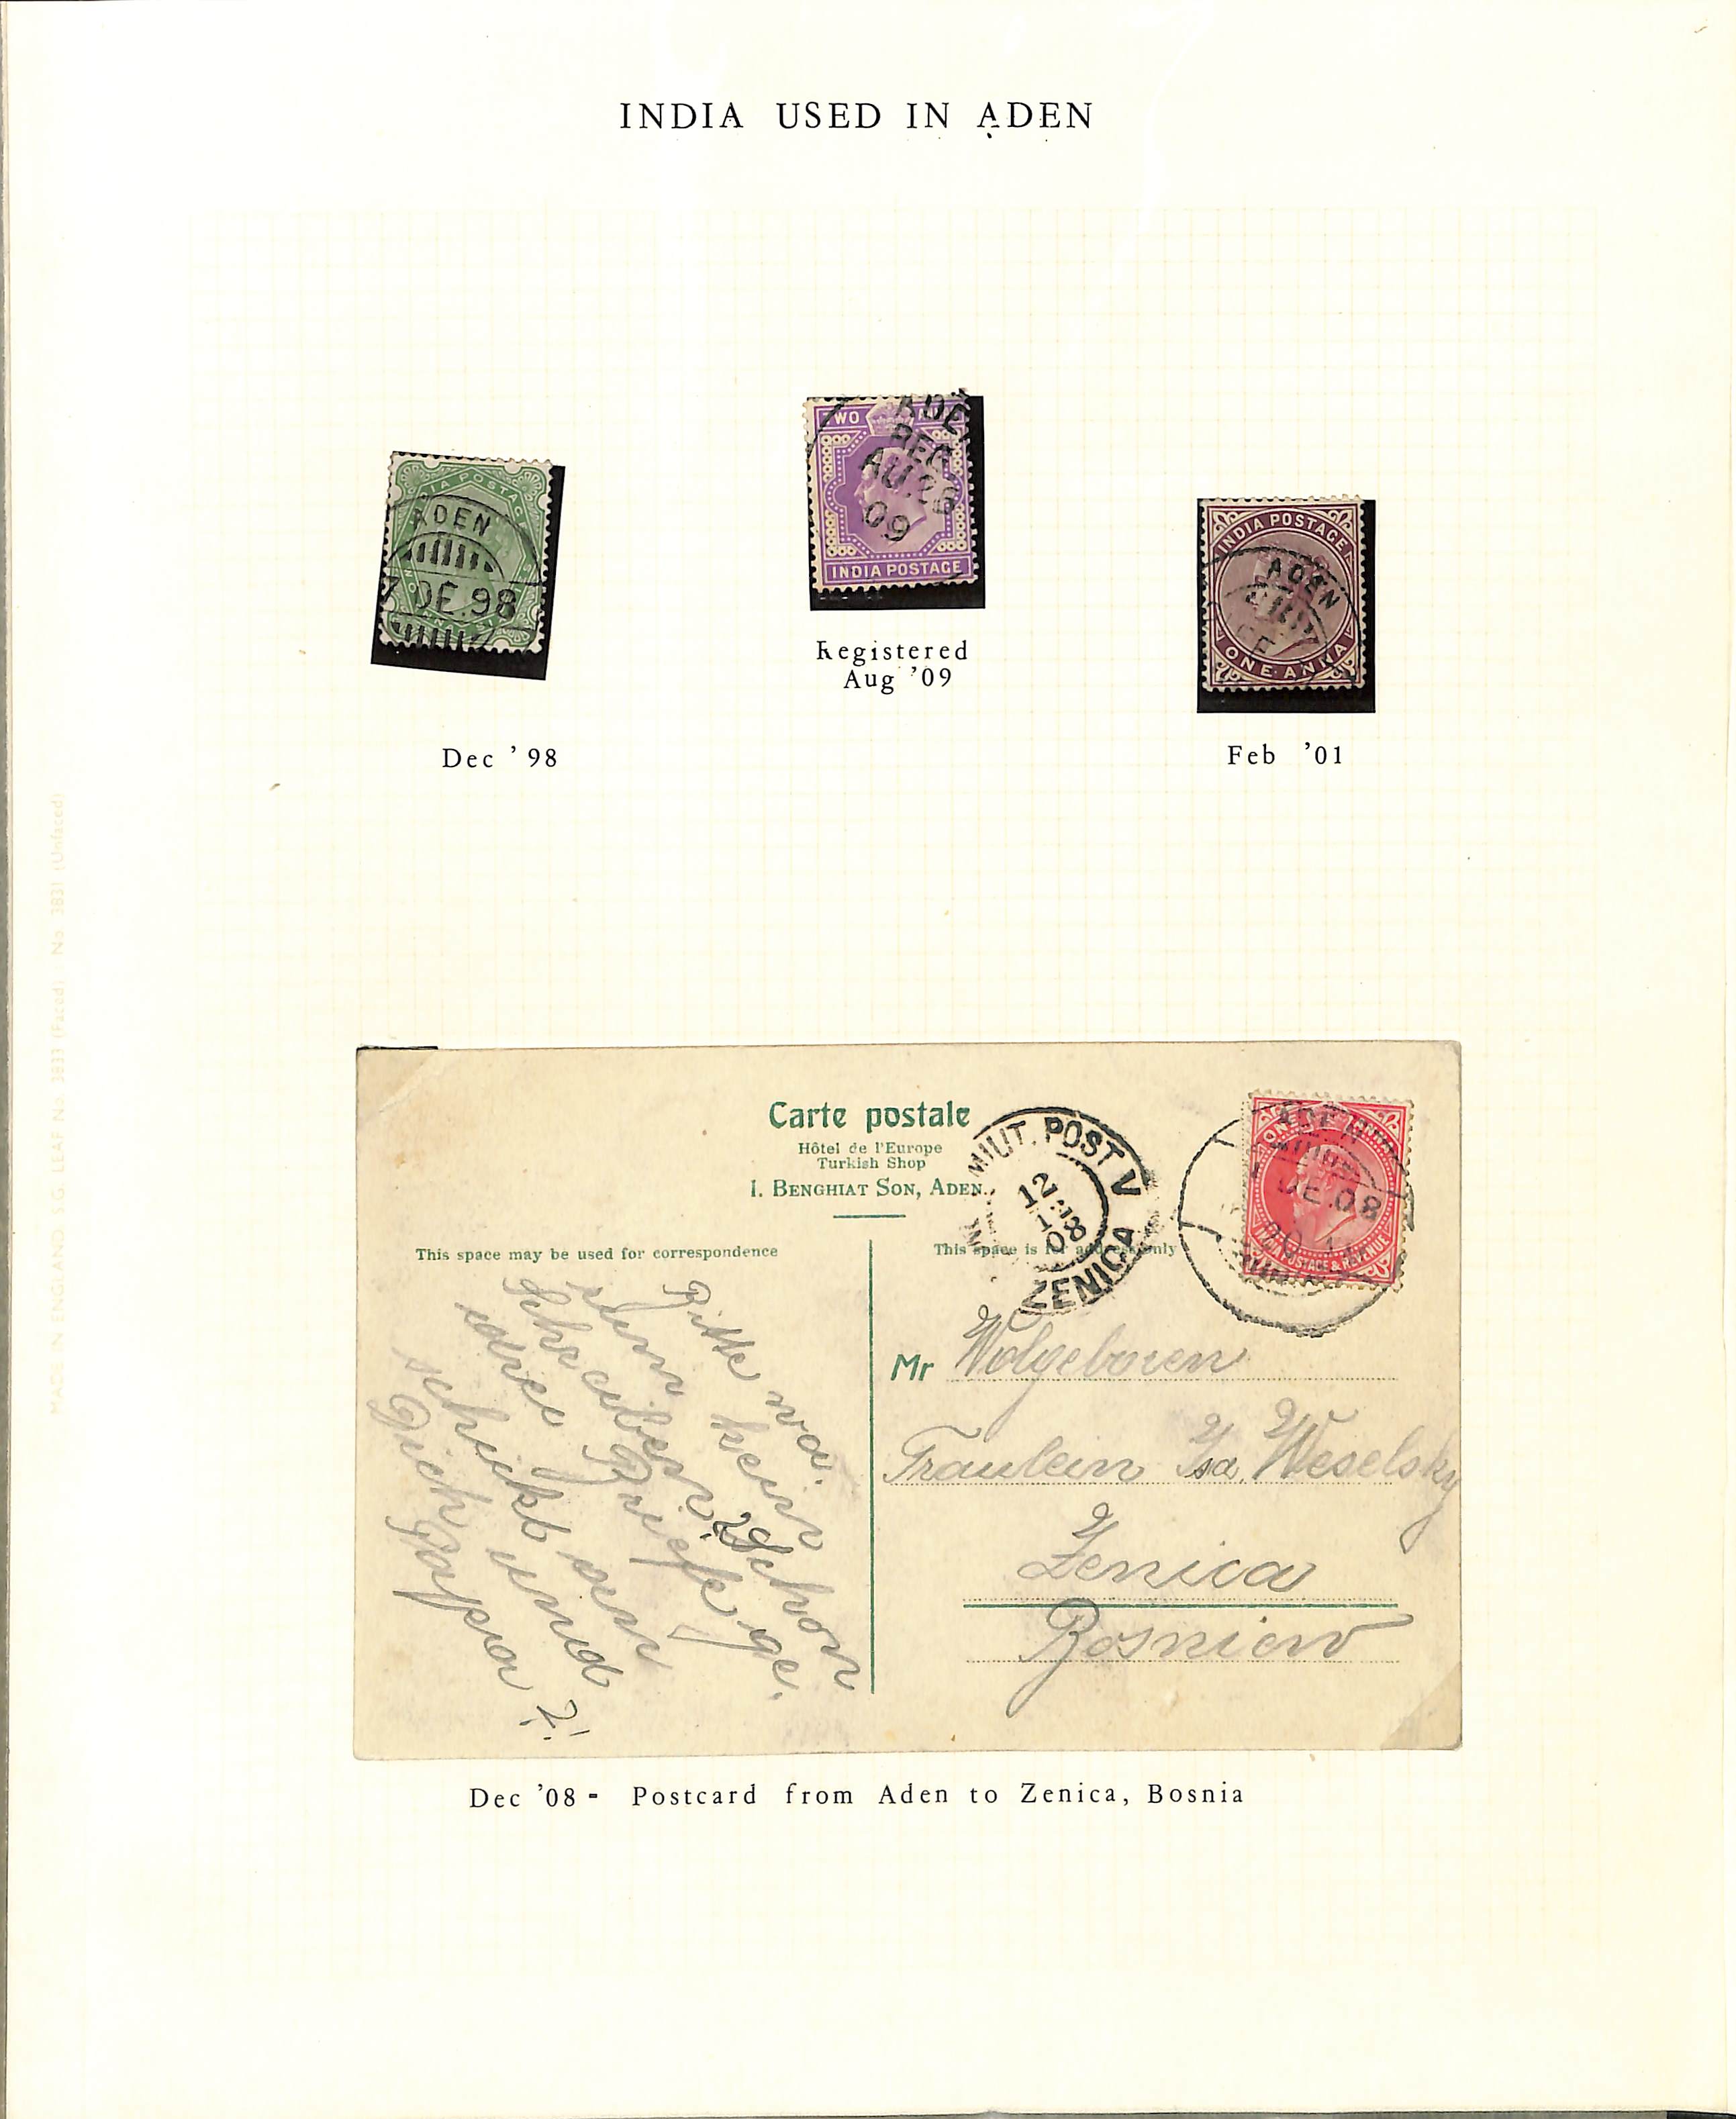 1905-63 Covers and cards including 1955-59 covers with Aden stamps cancelled at Maalla, Skeikh- - Image 5 of 5